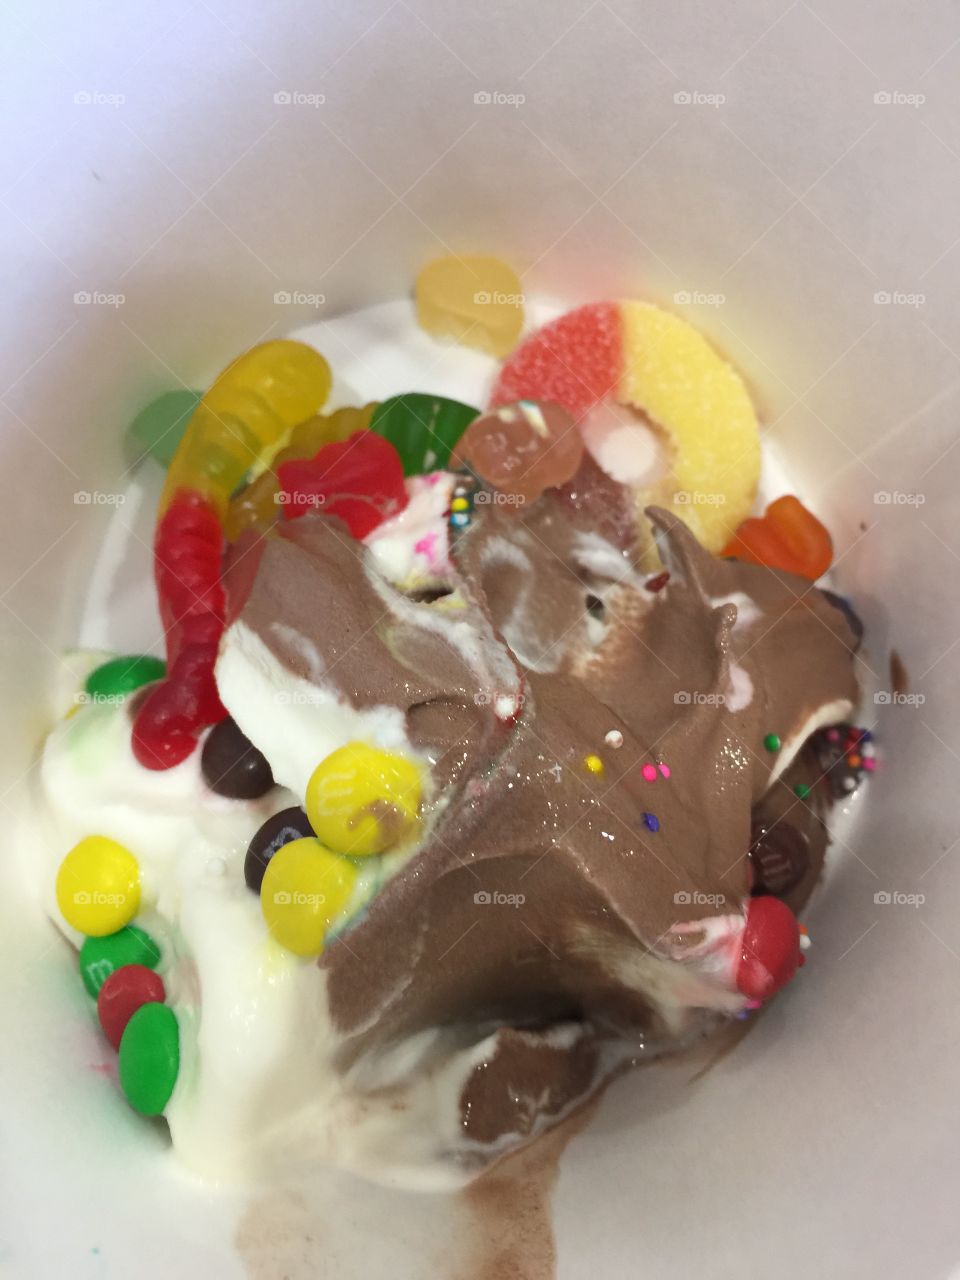 Bowl of Chocolate and vanilla yogurt with candies in it